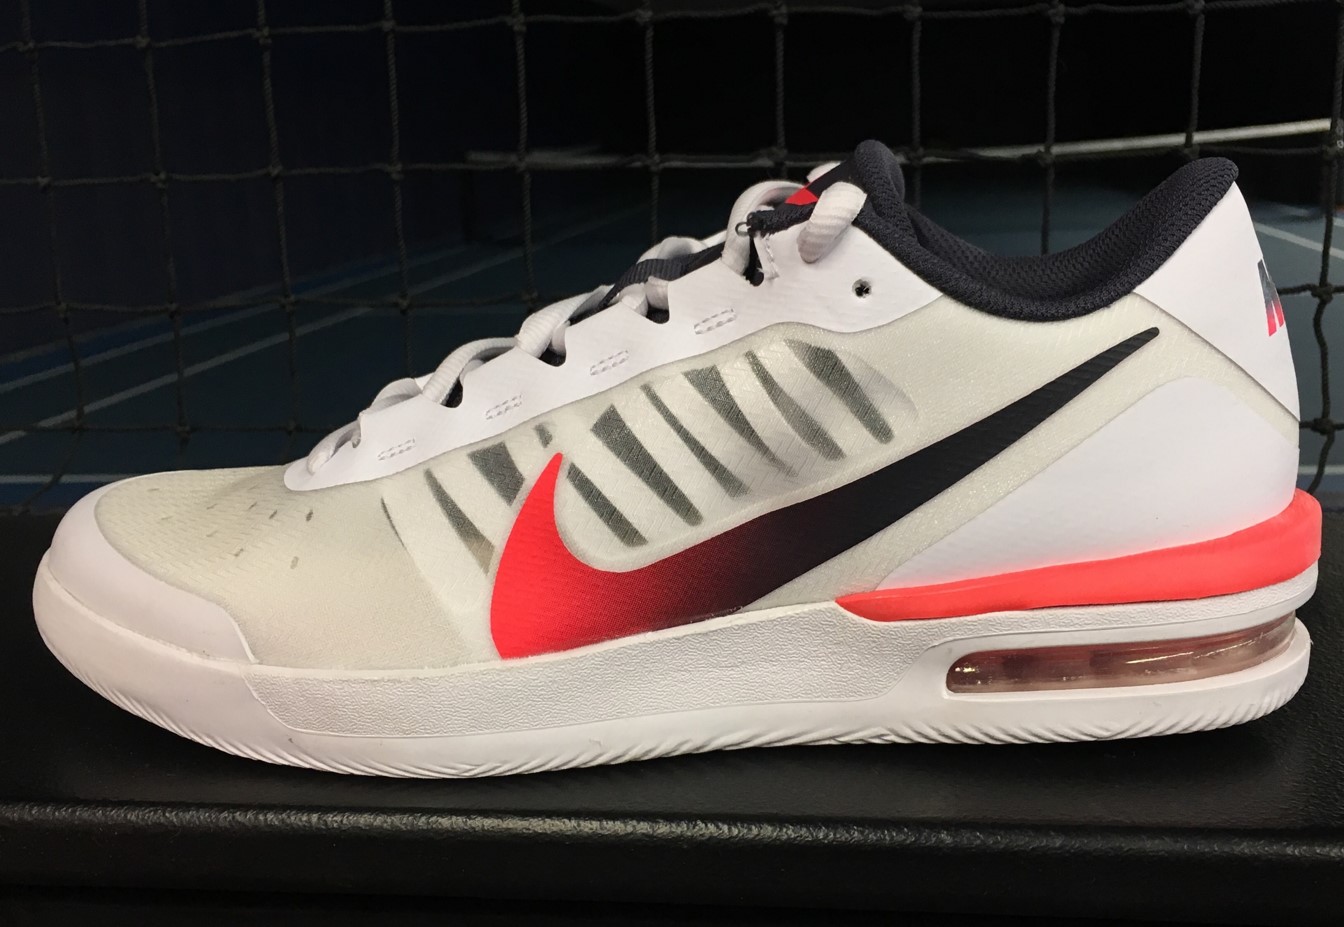 nike court air max vapor wing review